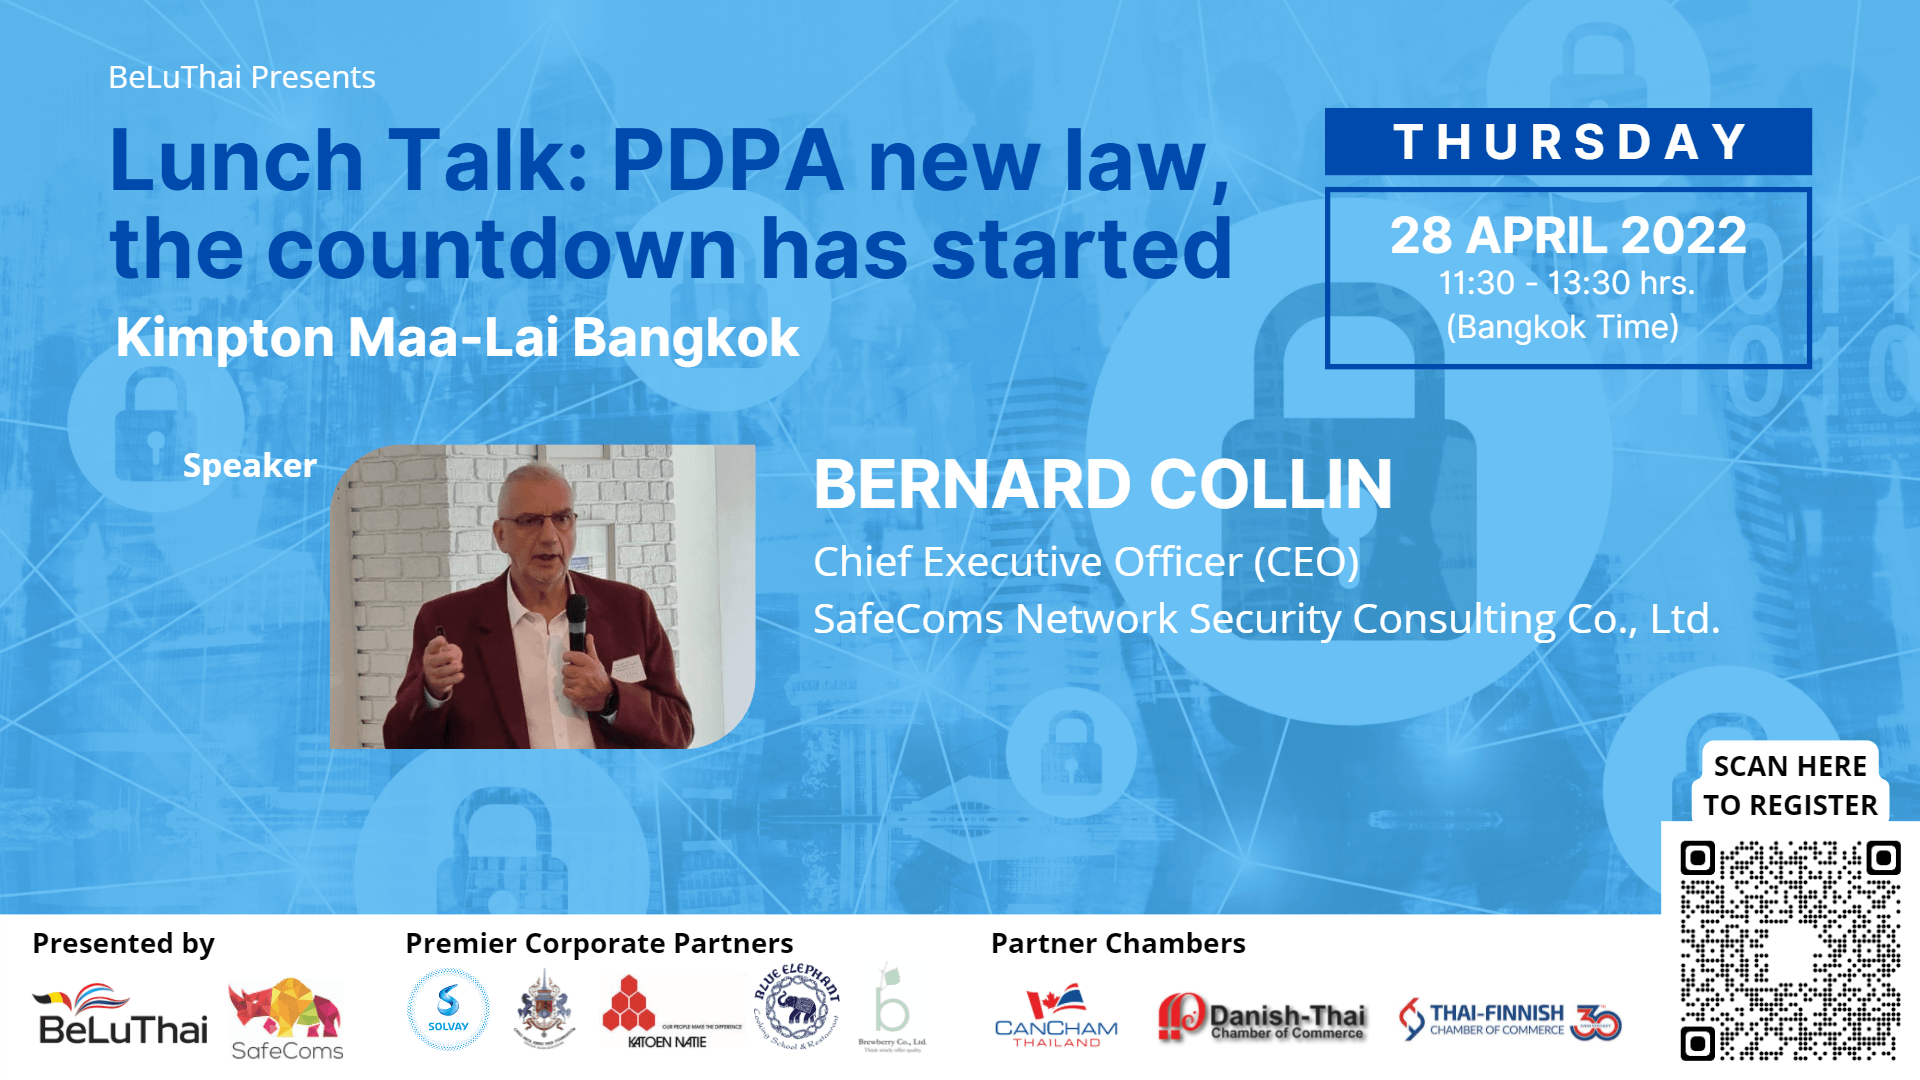 POSTPONED! PDPA new law, the countdown has started